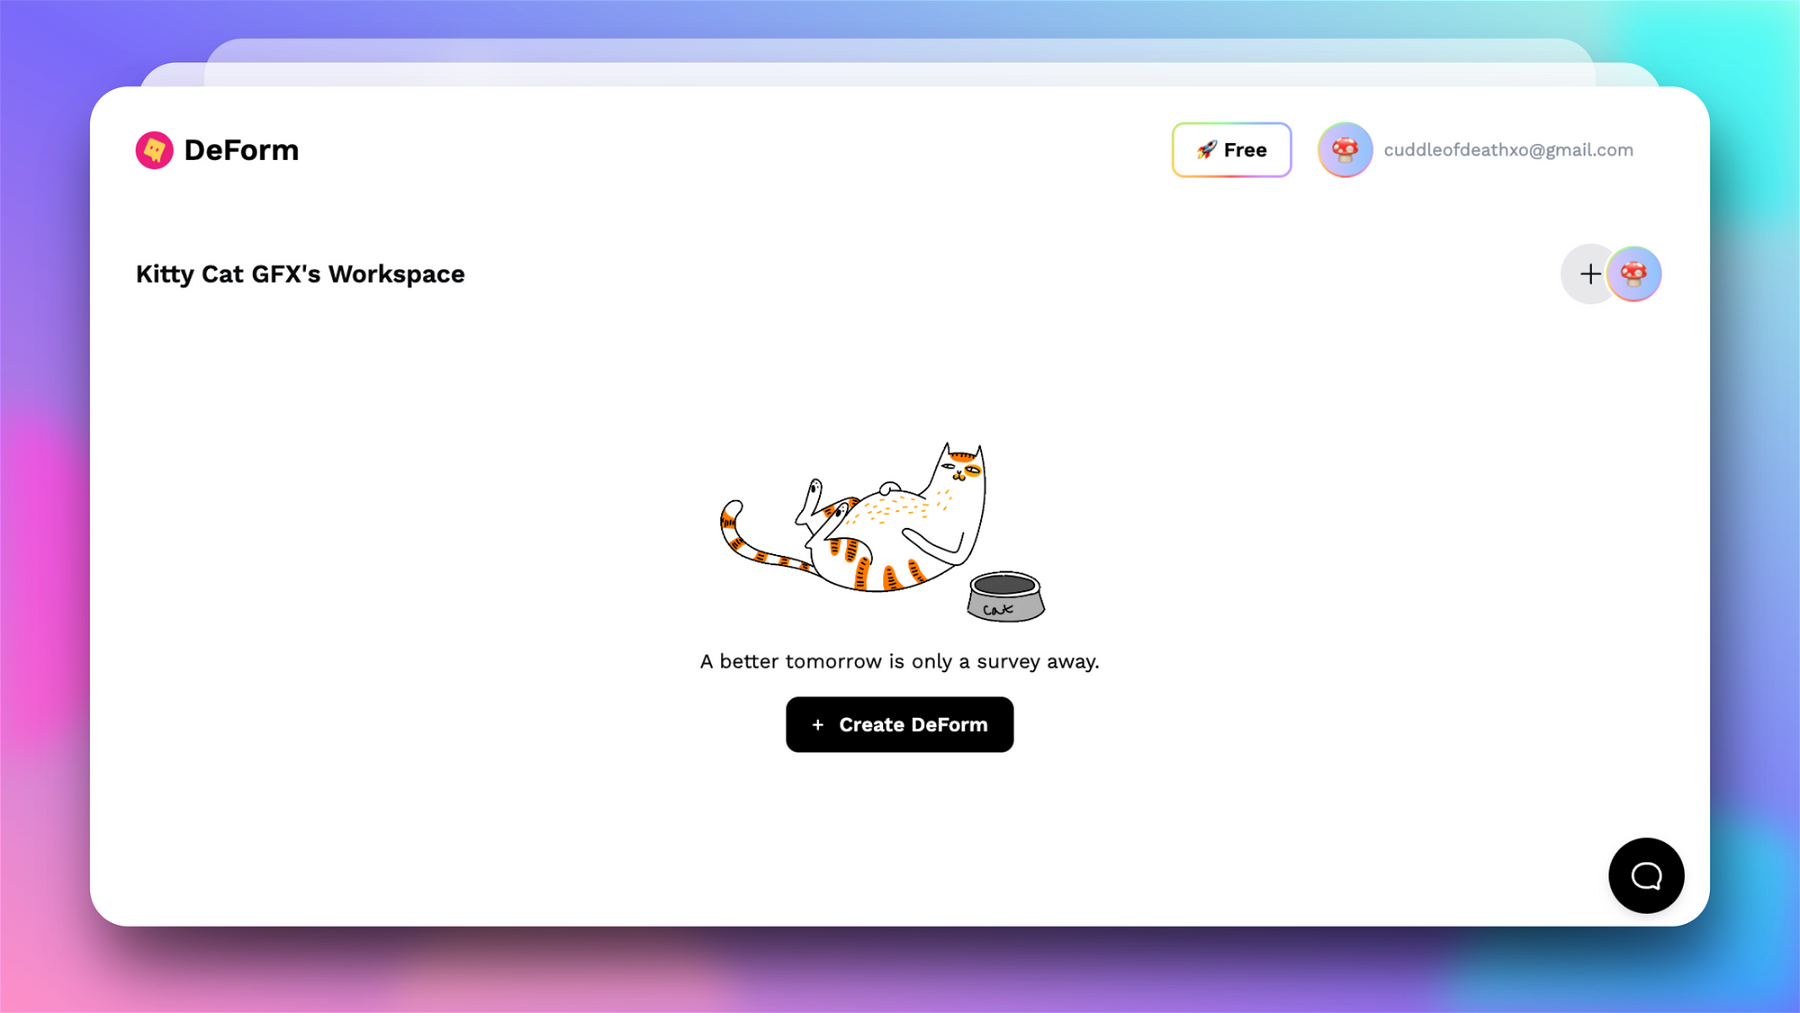 This is where your DeForm workspace is located. If it’s your first time here, you can create your first form using the Create DeForm button. Additionally, any forms you create will appear on this page!